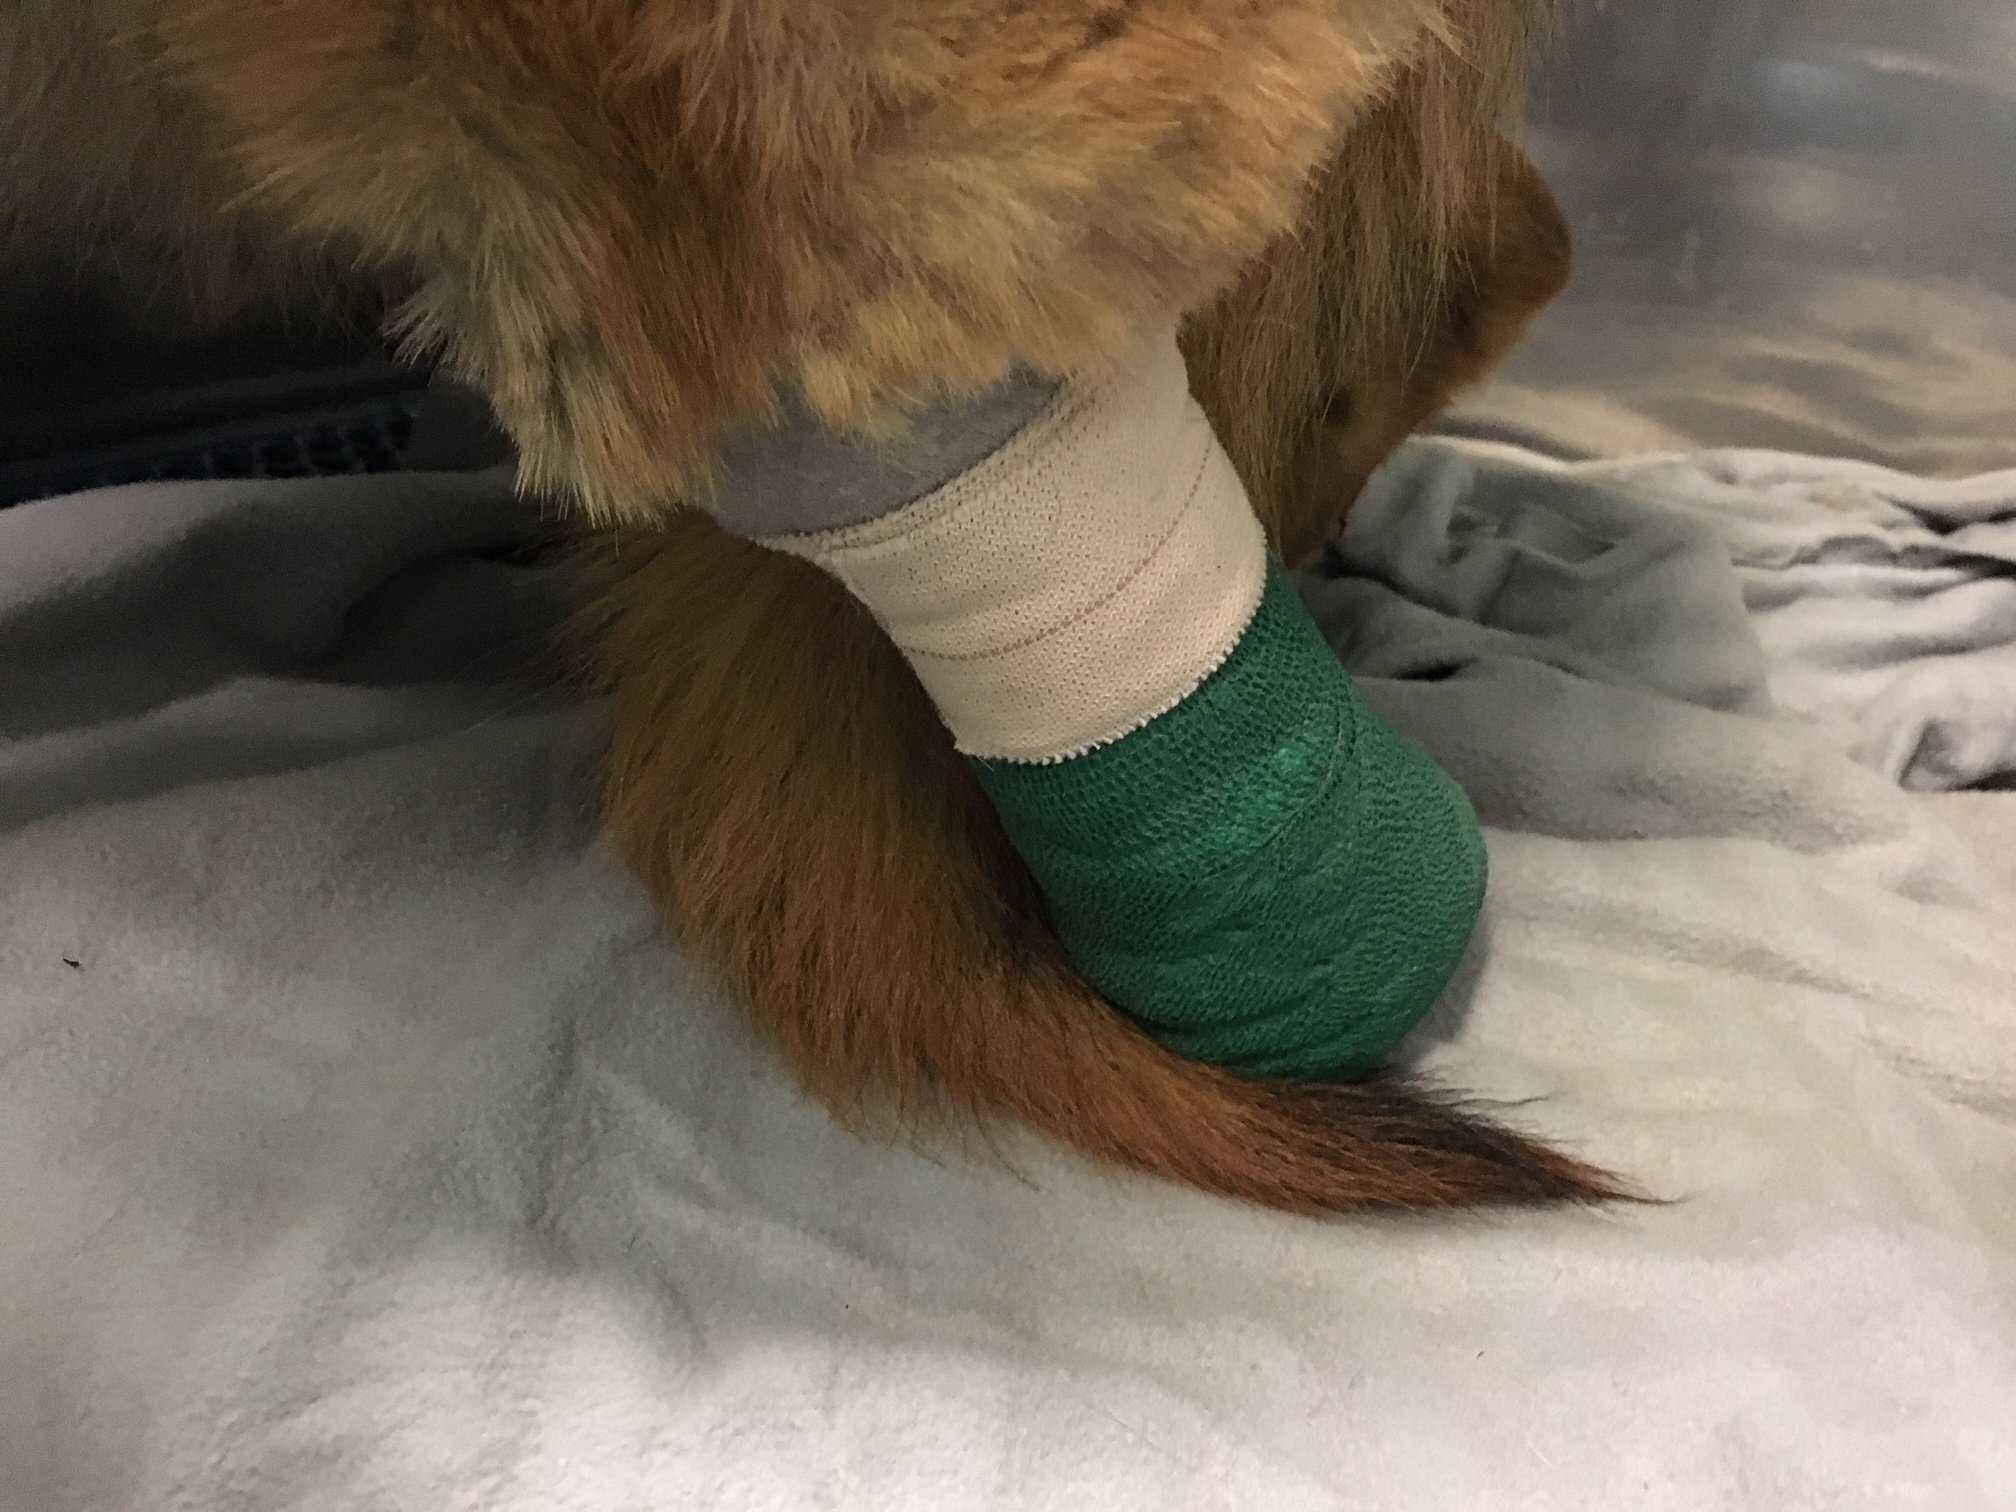 Dog with wire on leg attempted to bite off own foot to escape, report says